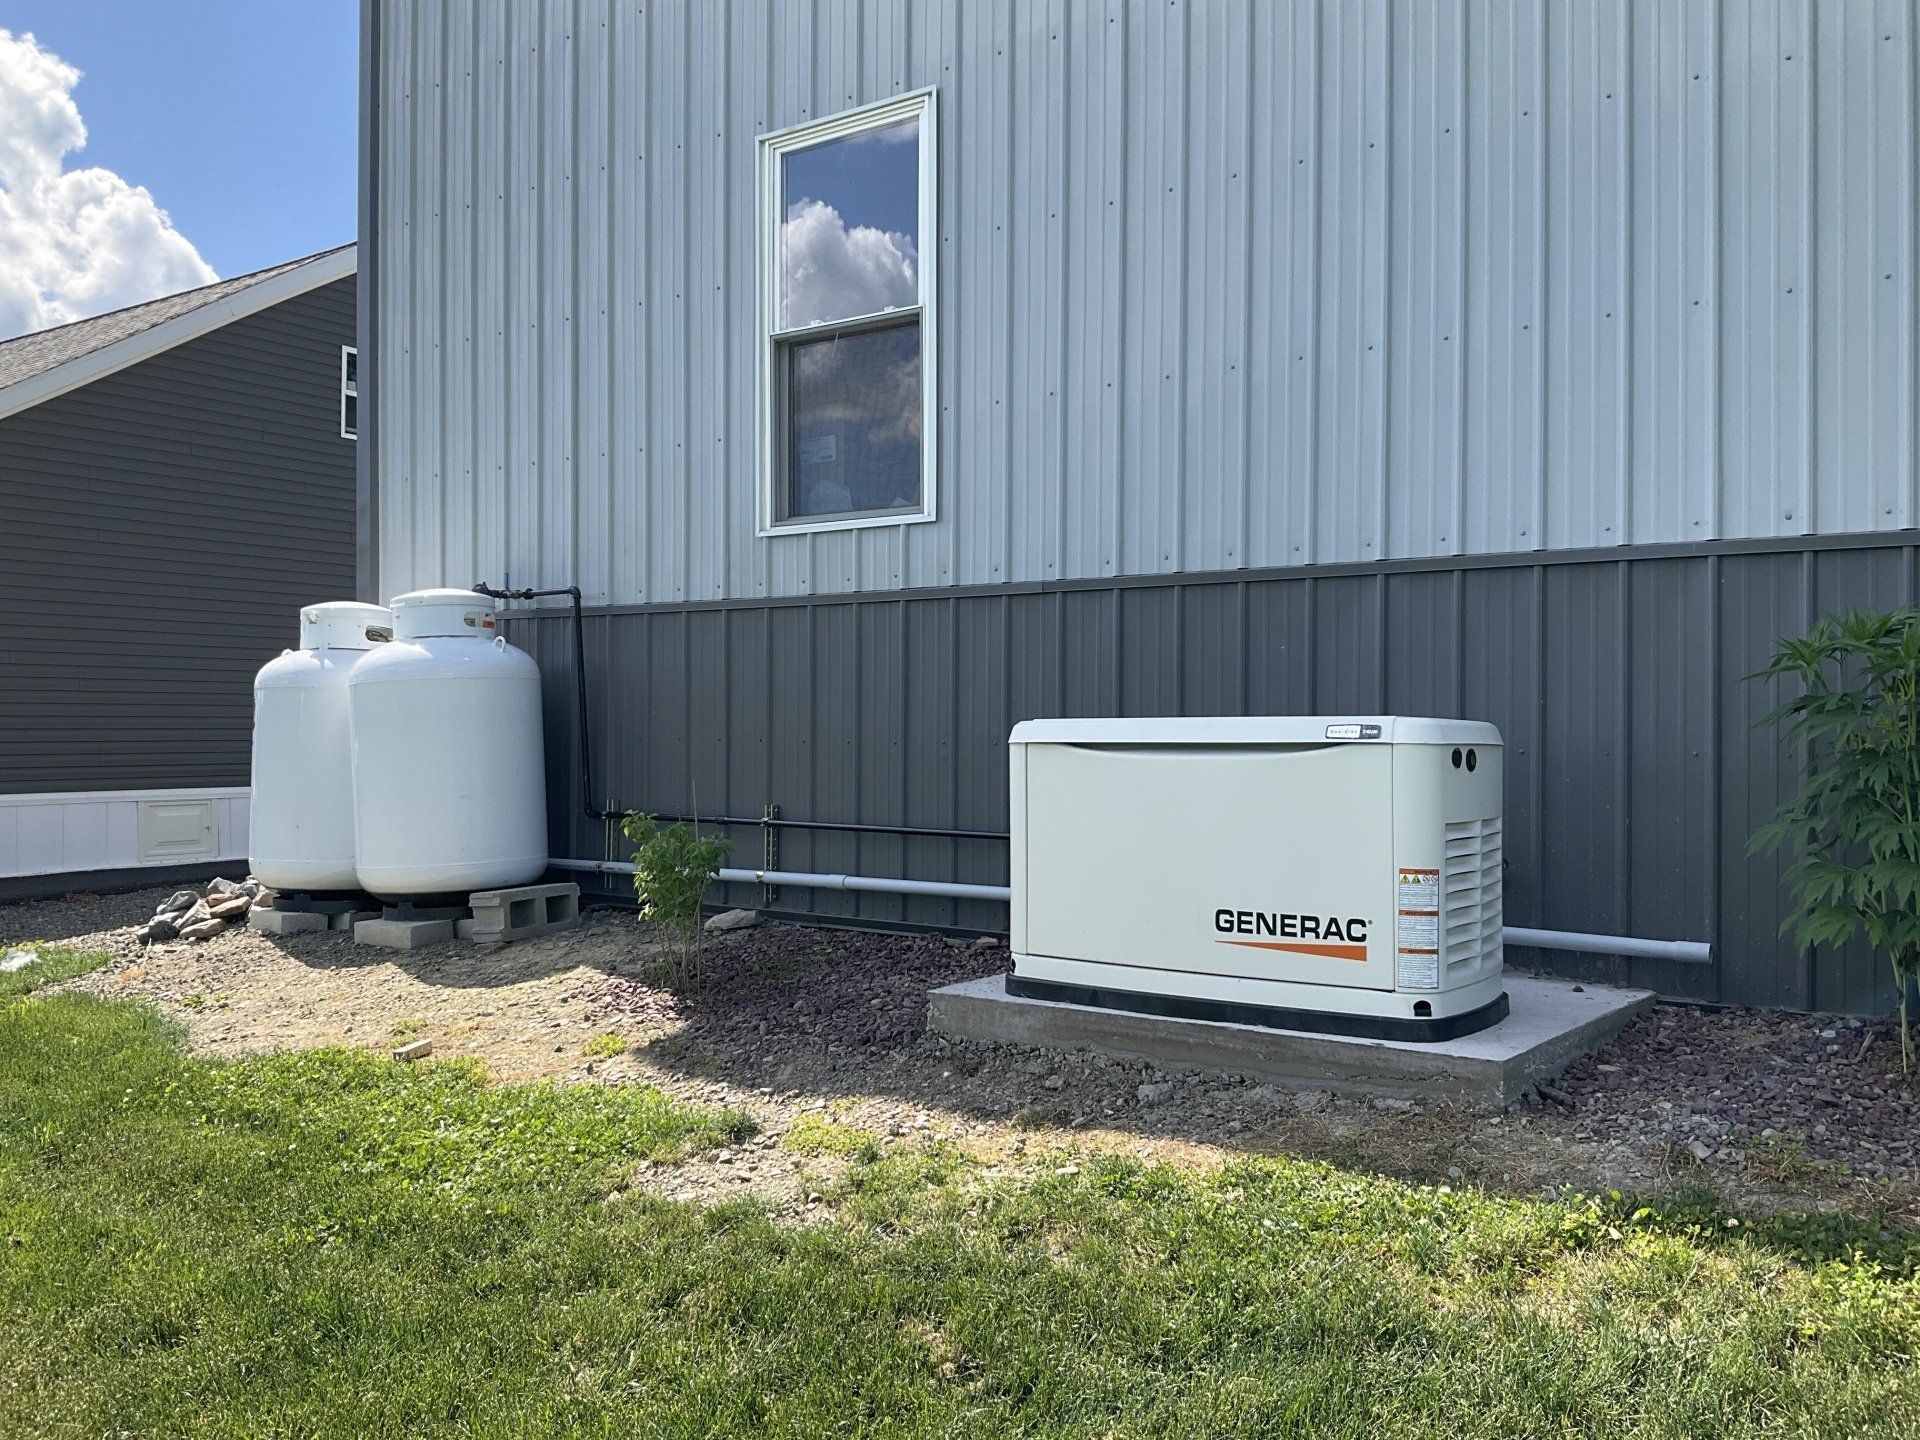 Image here shows a 24kW Home Generator from Generac